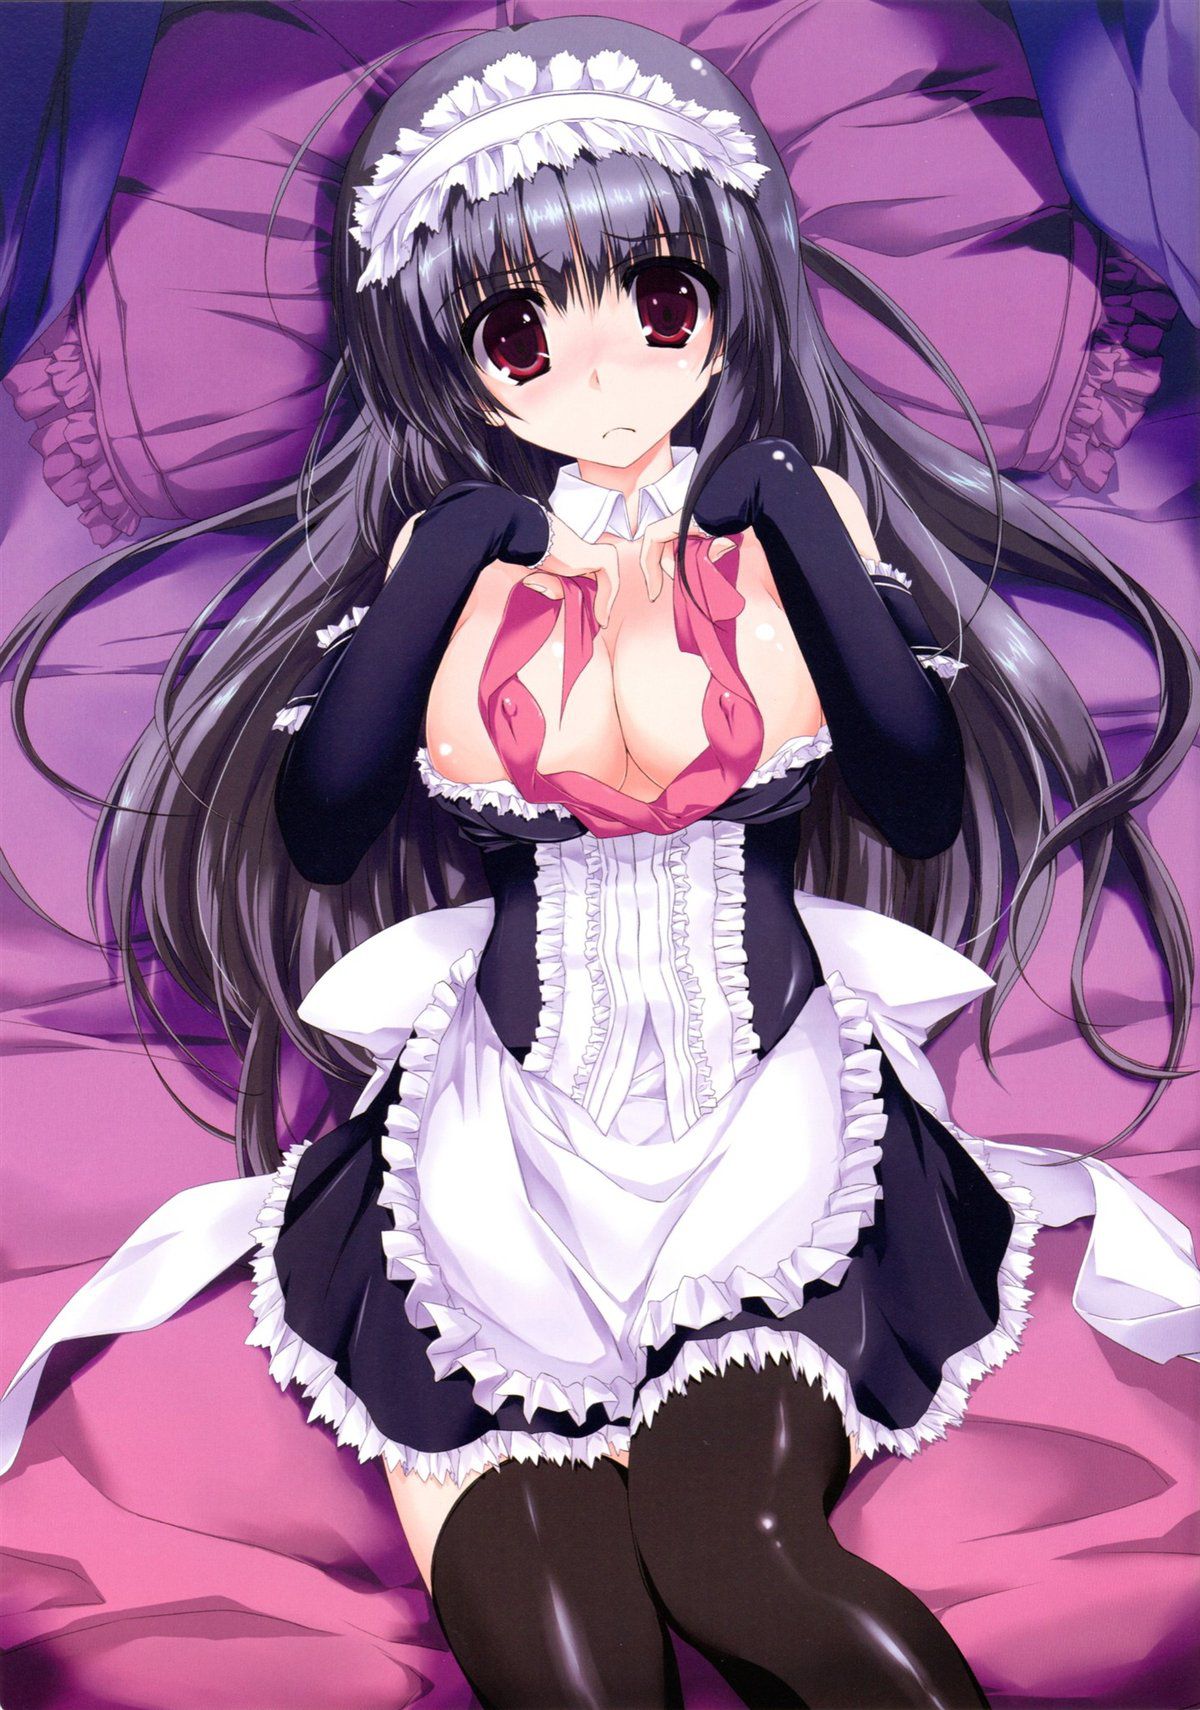 A sexual unbearable who wants to be served by the maid. 8